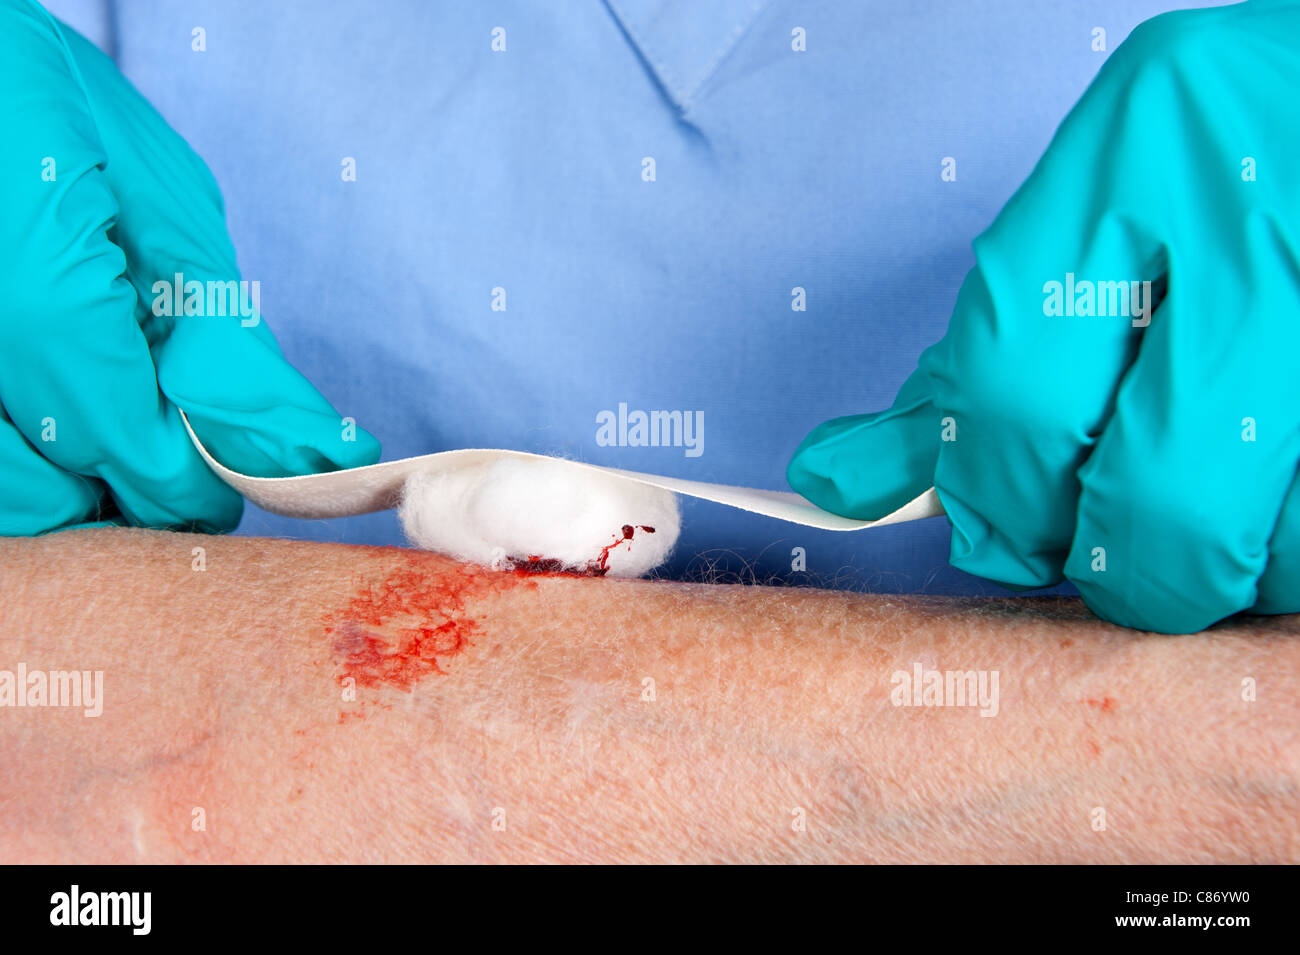 A nurse tends to a bloody wound on an elderly woman's arm Stock Photo